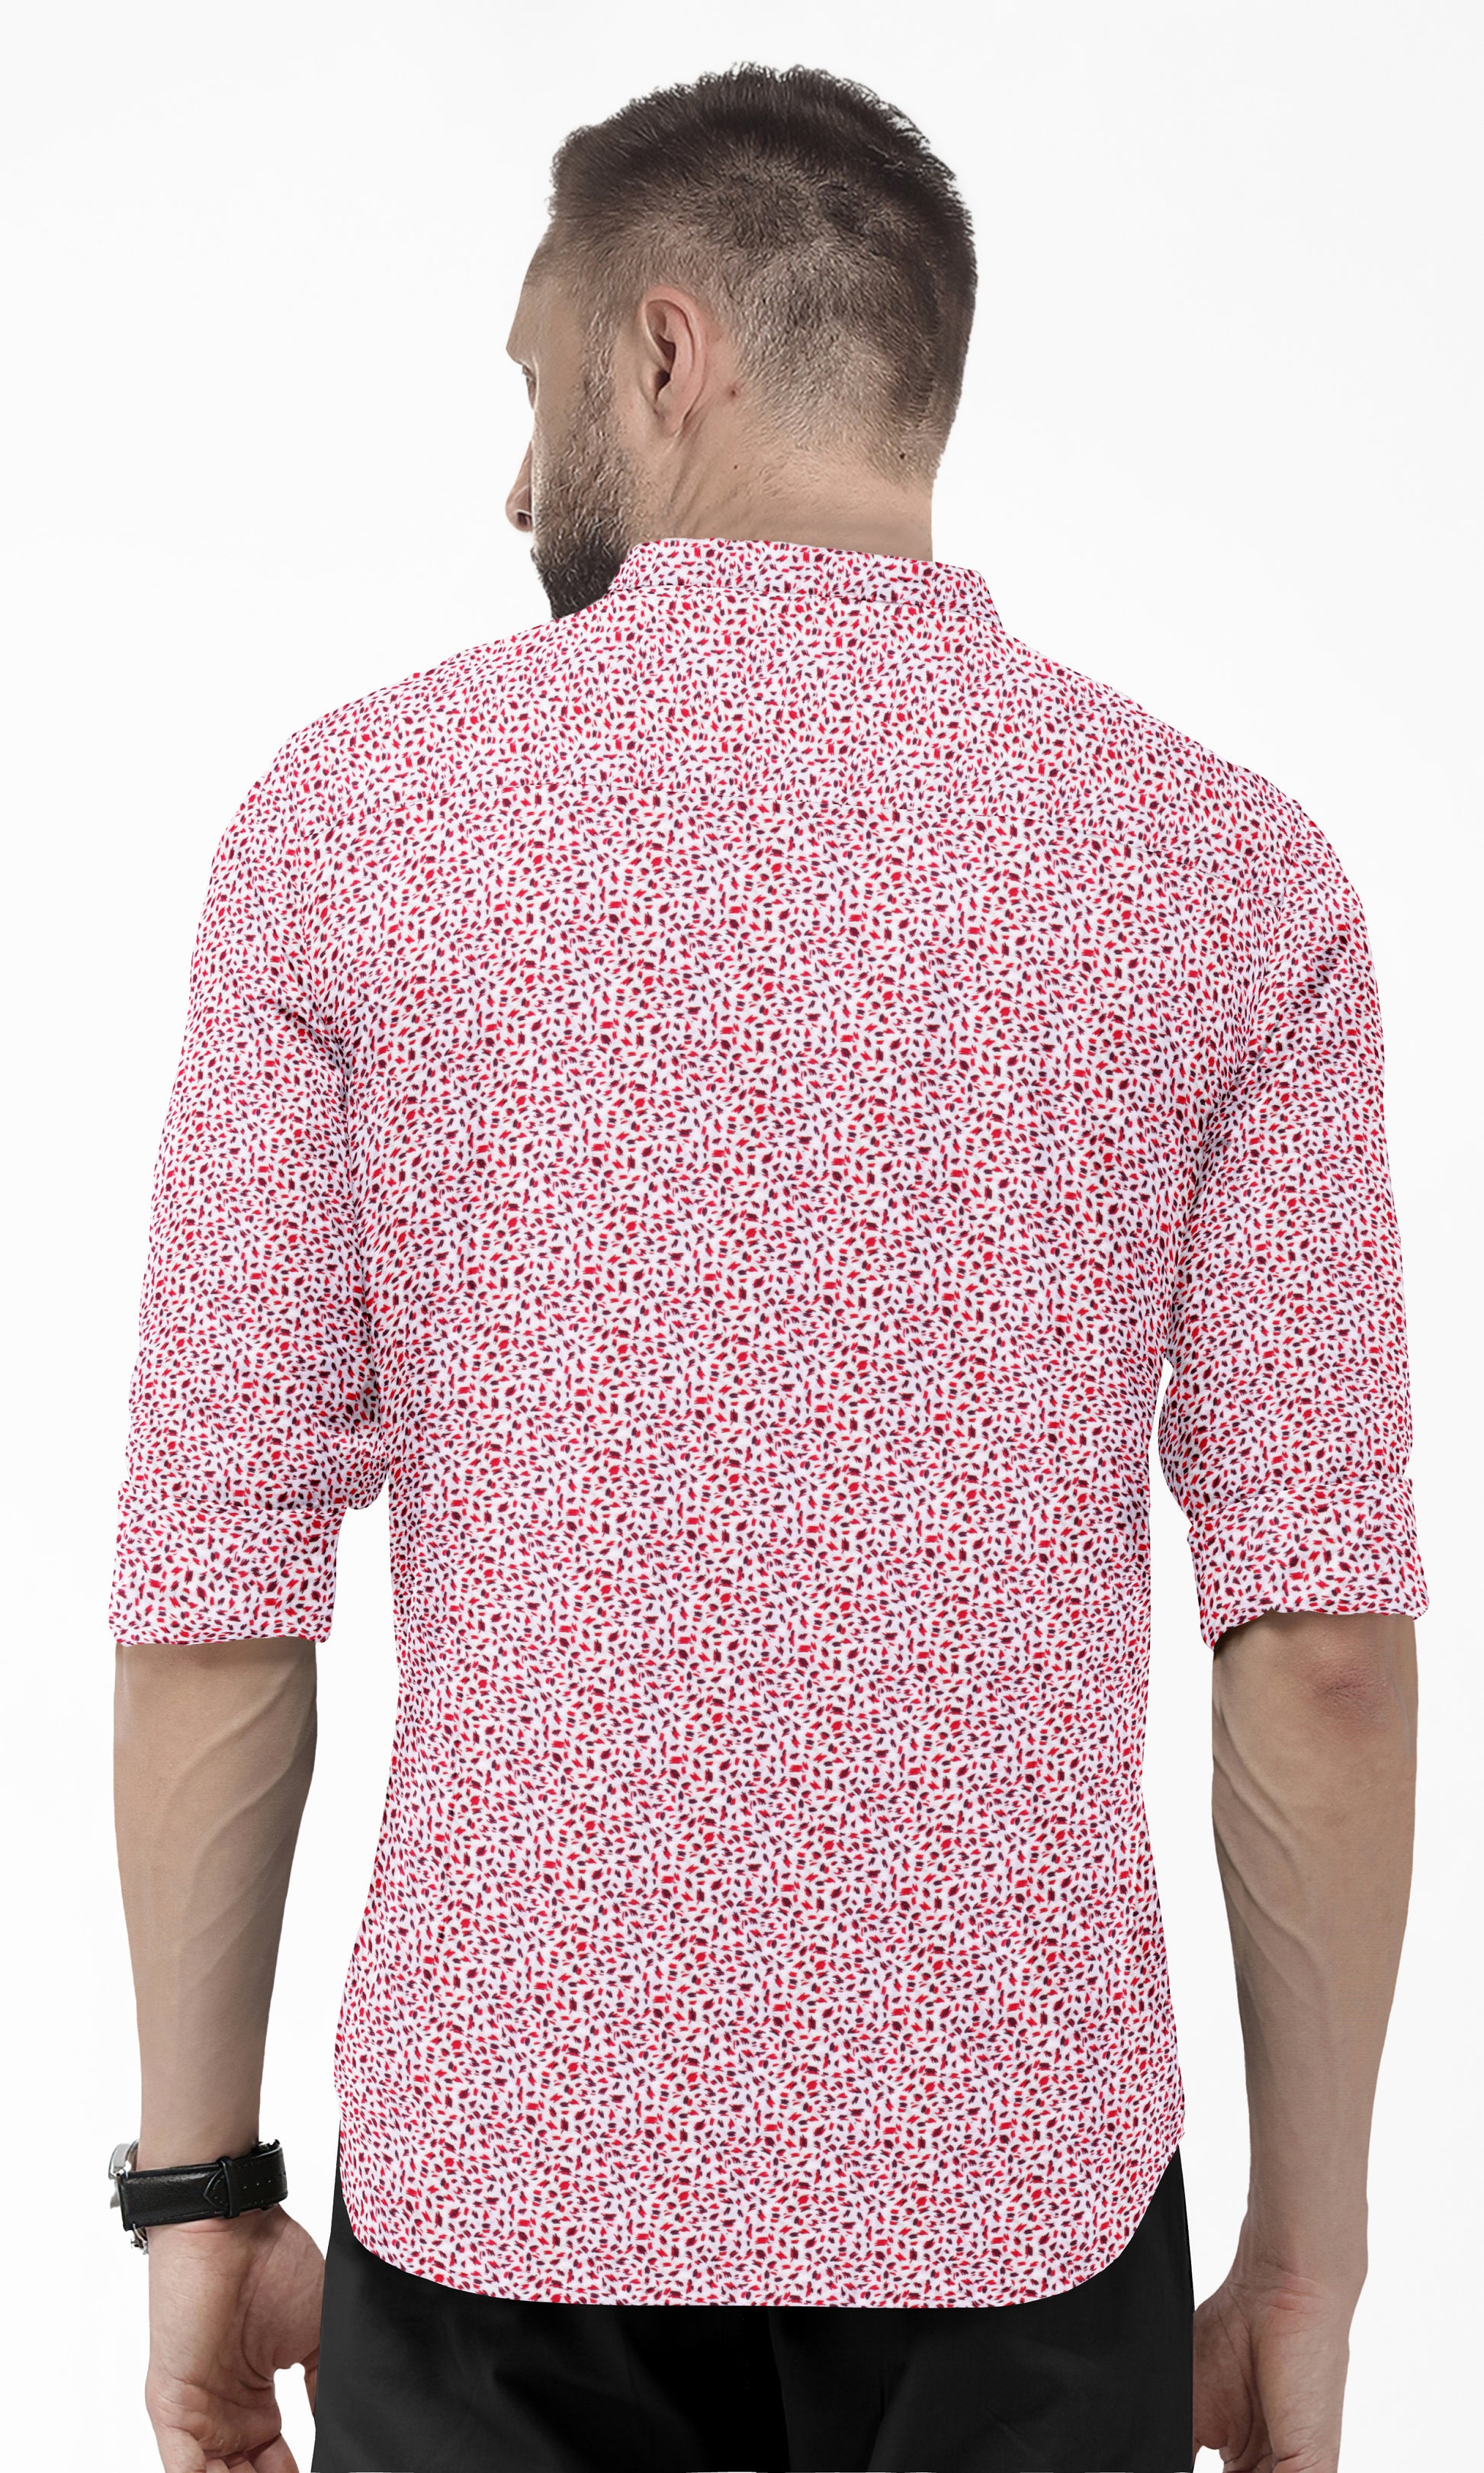 White with American Red and Maroon Lepord Printed Men's Premium Giza Cotton Shirt